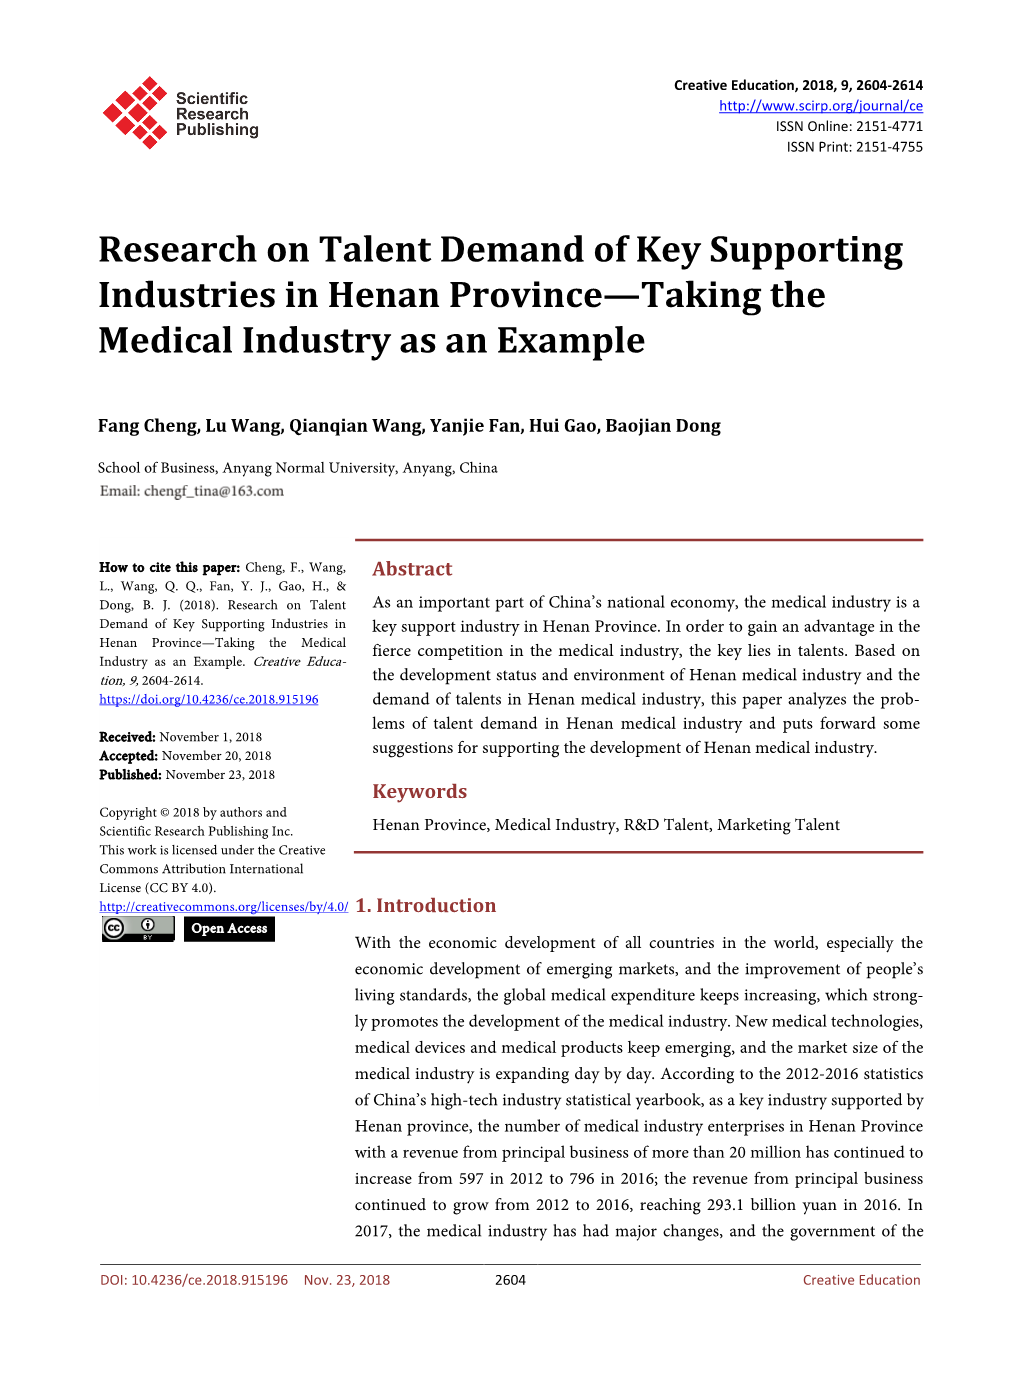 Research on Talent Demand of Key Supporting Industries in Henan Province—Taking the Medical Industry As an Example